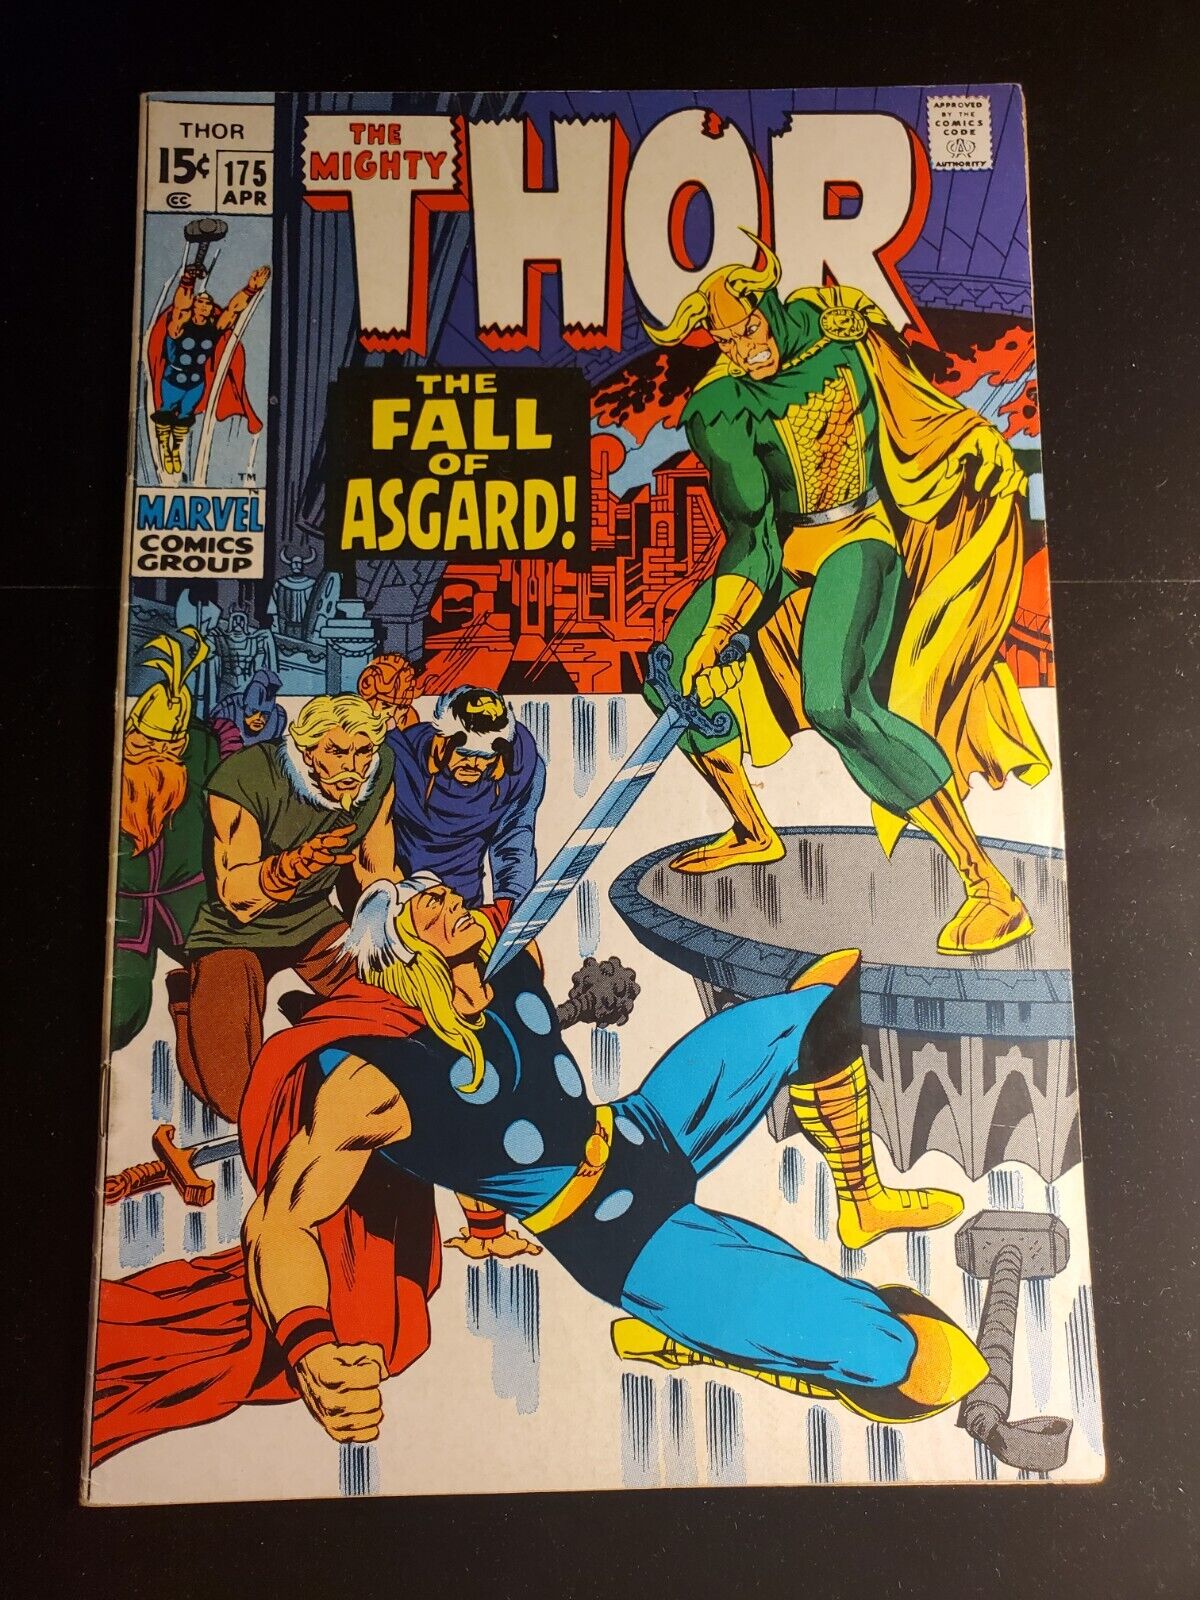 Thor 175, Marvel Comics 1970, Stan Lee and Jack Kirby,  The Fall Asgard